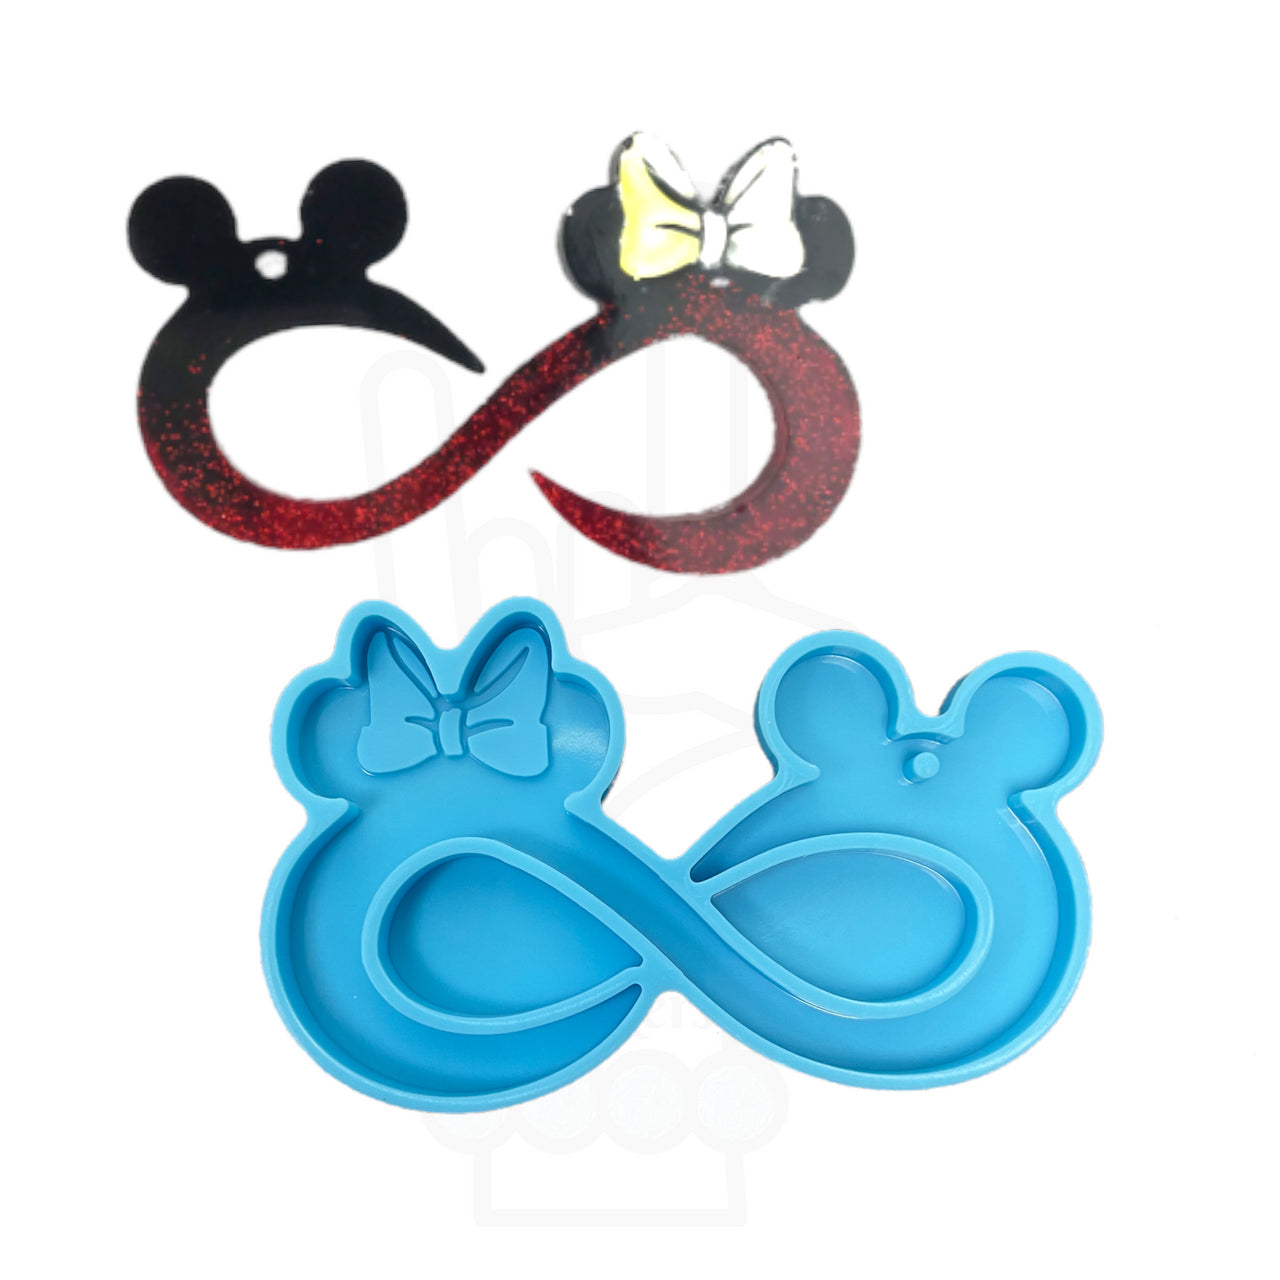 Mr. & Mrs. Mouse Infinity Keychain Silicone Mold for Epoxy Resin Art